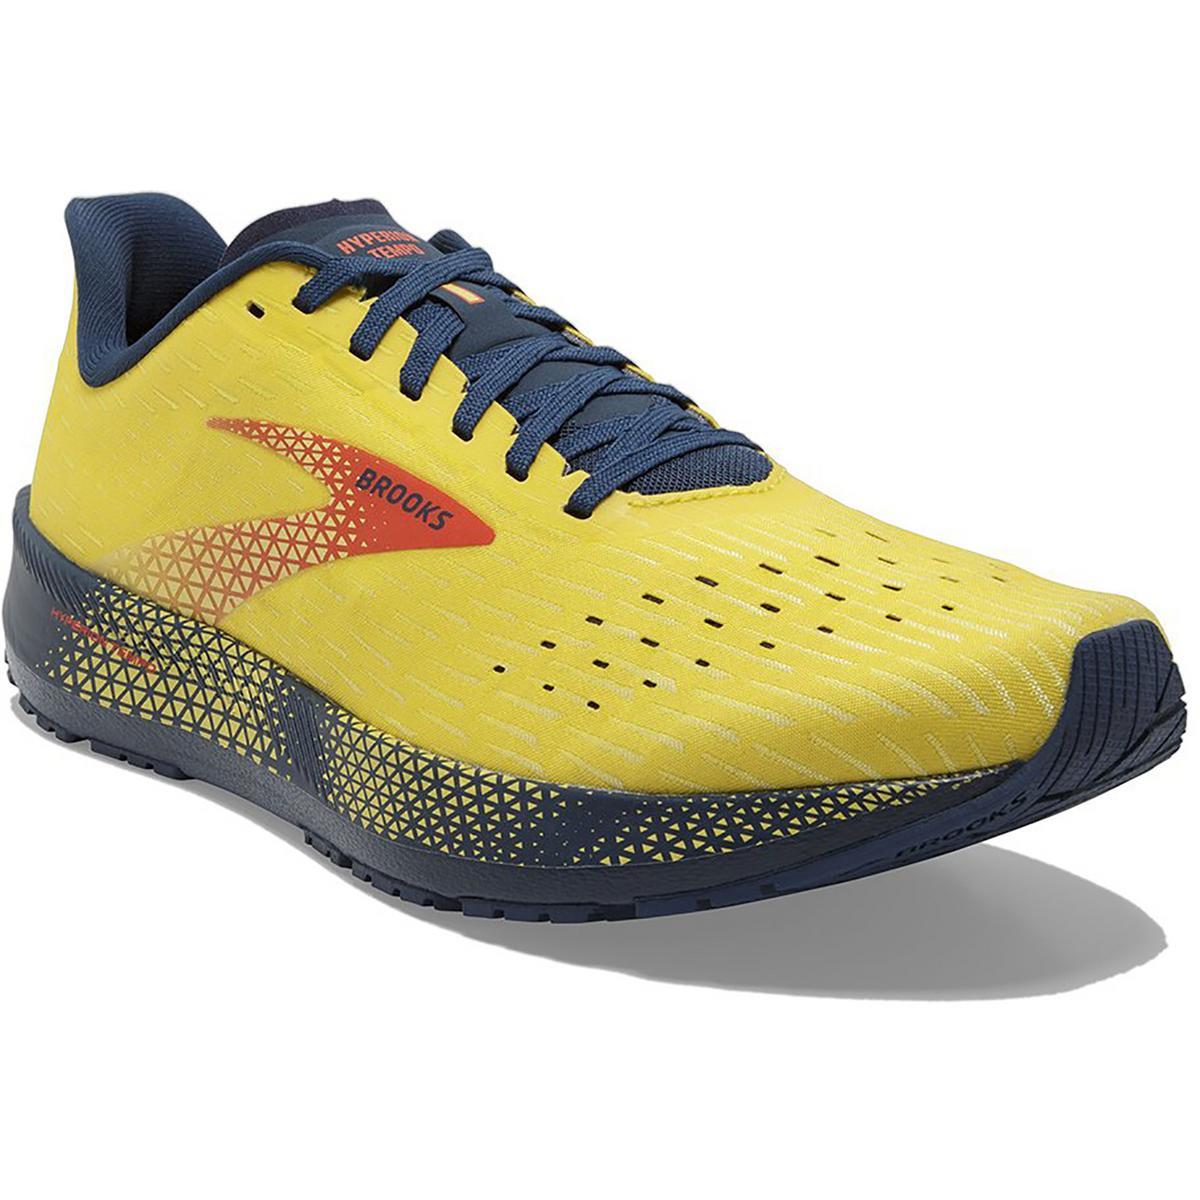 Brooks Mens Hyperion Tempo Fitness Workout Running Shoes Sneakers Bhfo 8544 Maize/Titan/Cherry Tomato